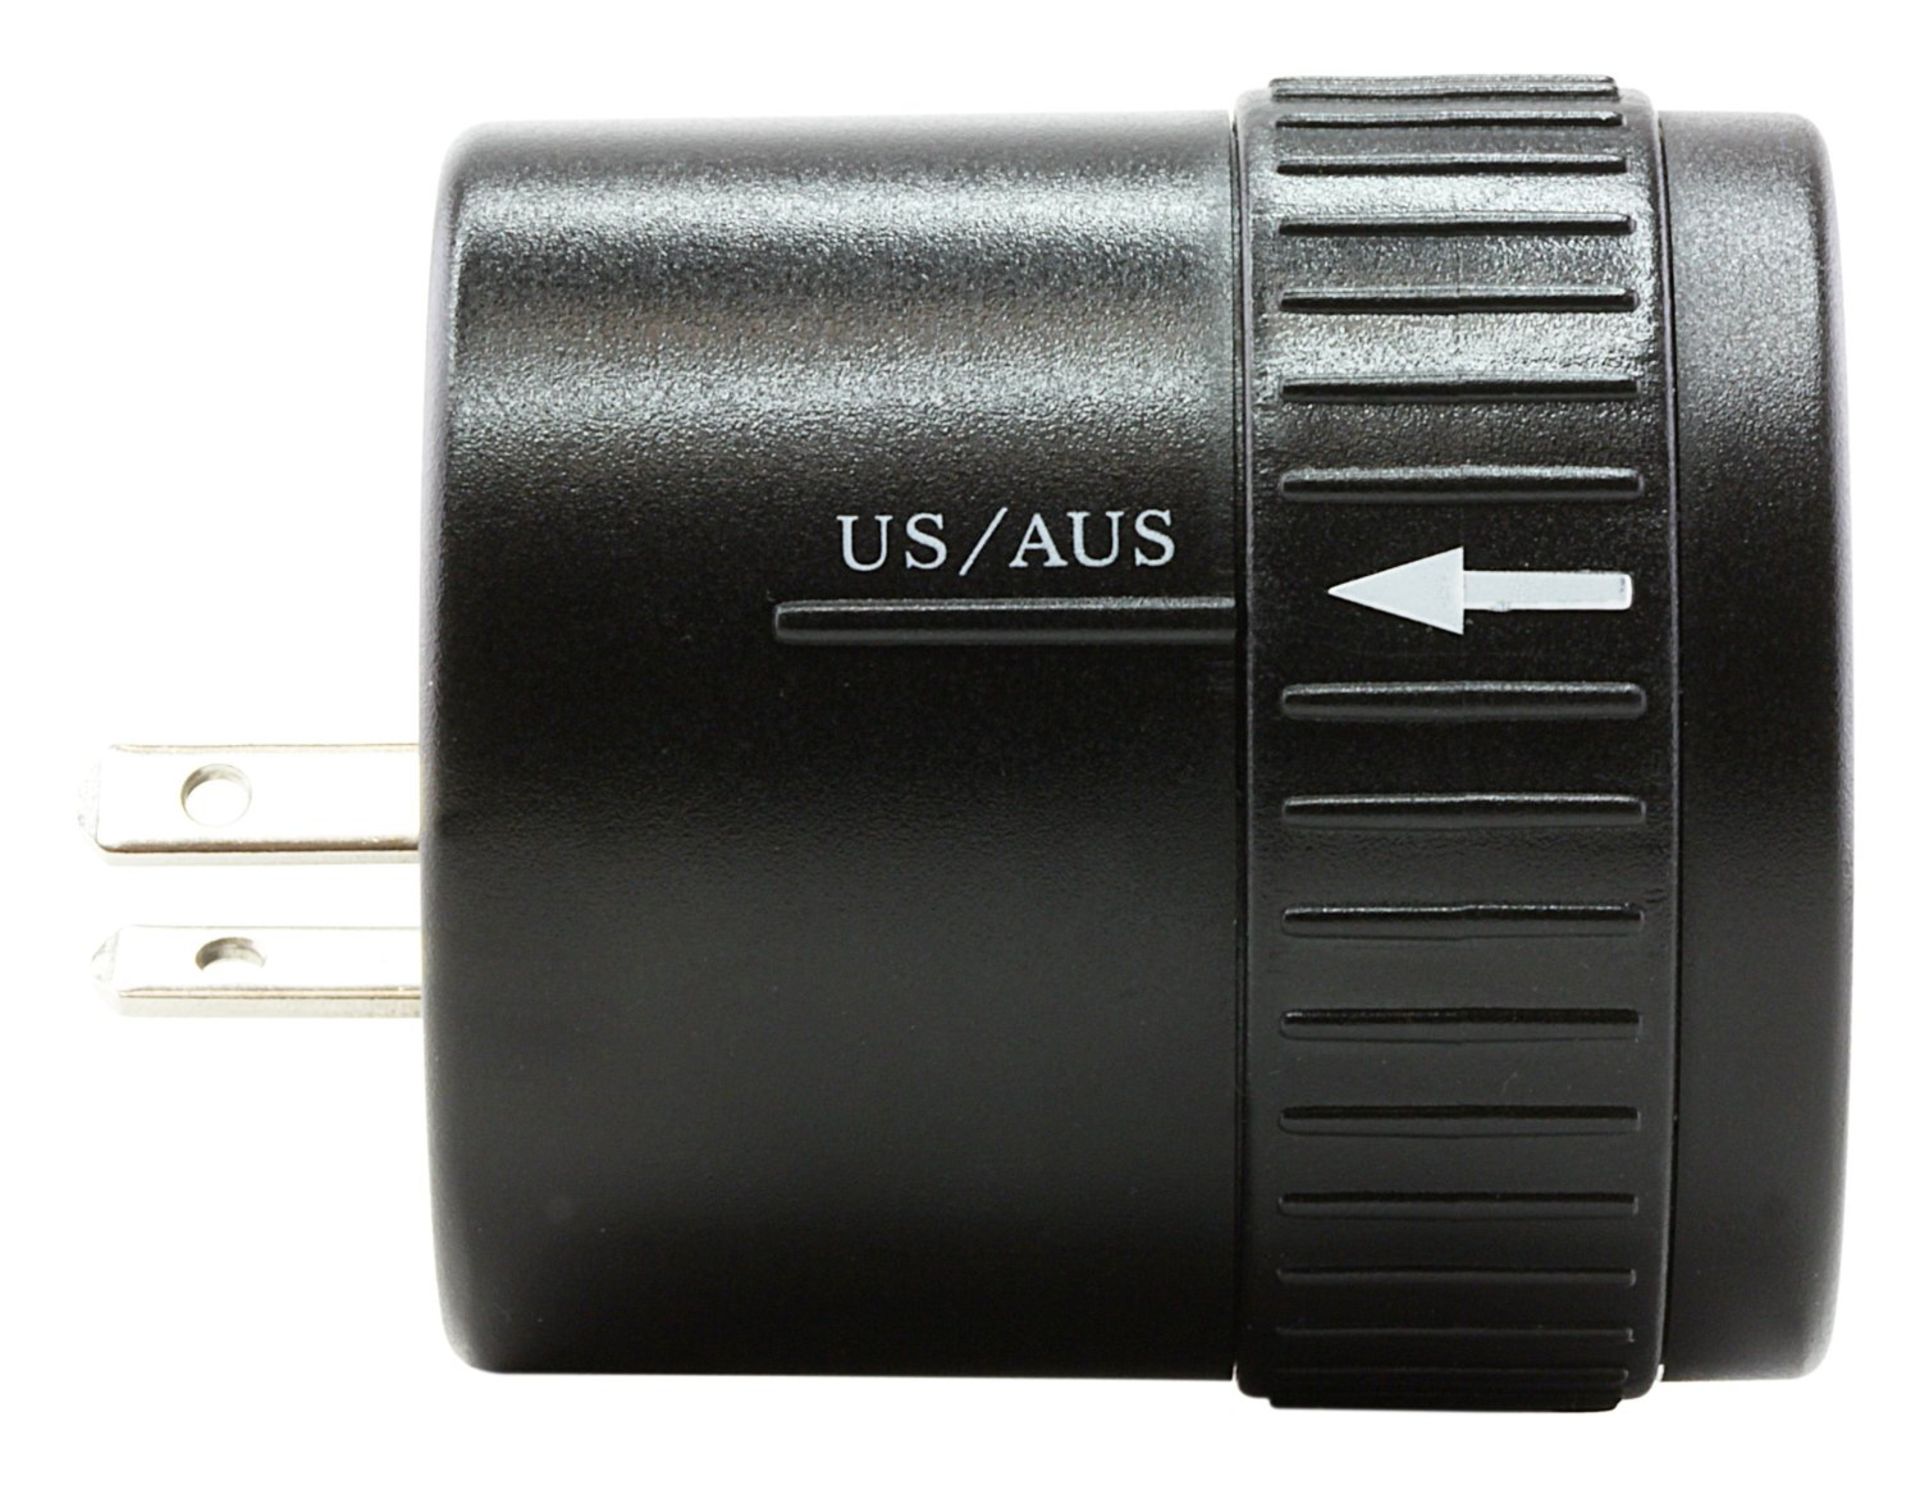 Lot of 48 Units-Kit Universal World Portable Travel Adapter for UK/EU/US and AUS - Black - Image 3 of 4